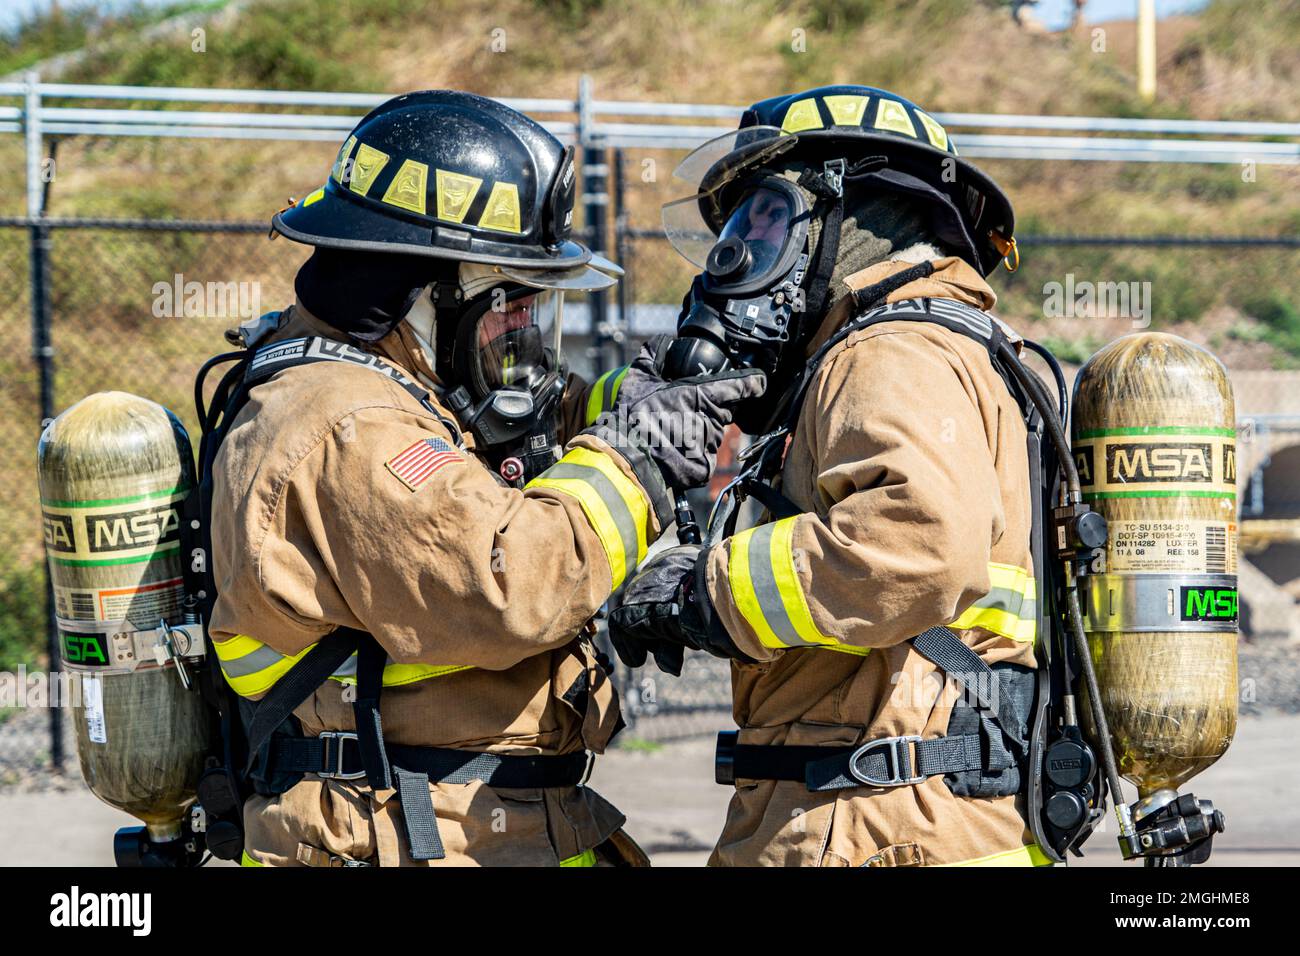 Firefighters John Russum and Tad Fragale with the 914th Fire Emergency Services do a quality check of each other's protective gear before putting out an interior structure fire within a simulated Boeing 737 crash at a training facility in Rochester, New York, August 24, 2022. Ensuring protective equipment is in good shape prior to putting out fires is essential to protect firefighters from potentially fatal flames and gasses. Stock Photo